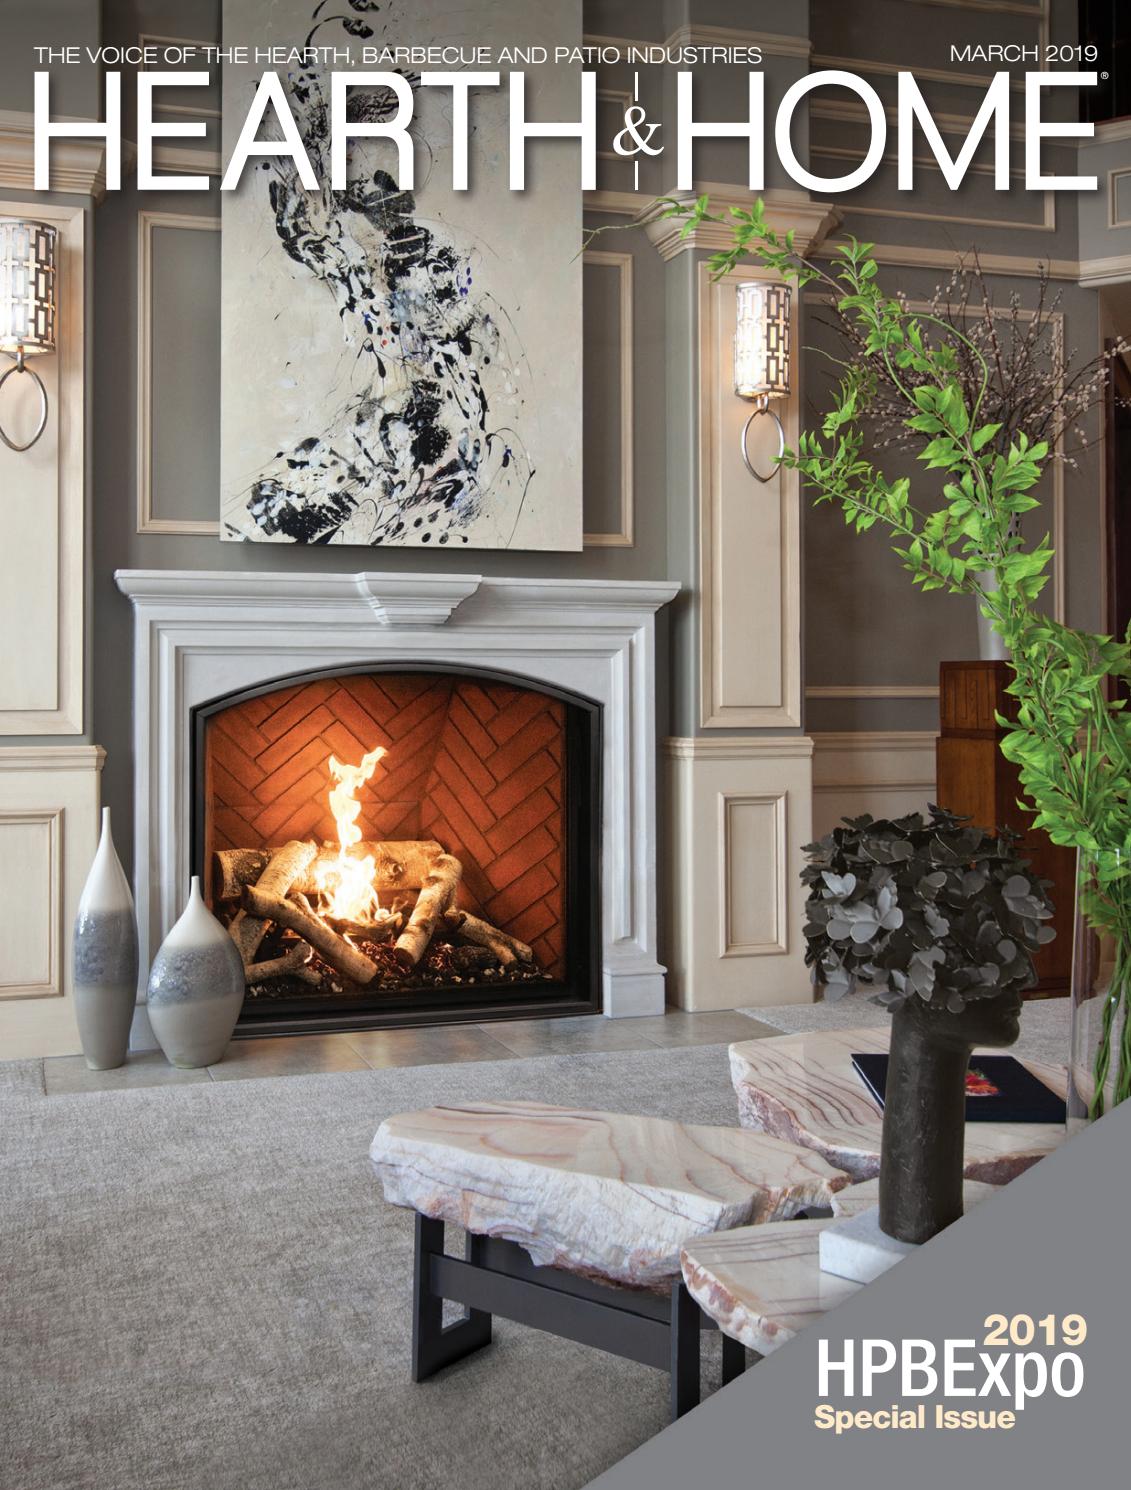 Two Sided Electric Fireplace Fresh Hearth & Home Magazine – 2019 March issue by Hearth & Home